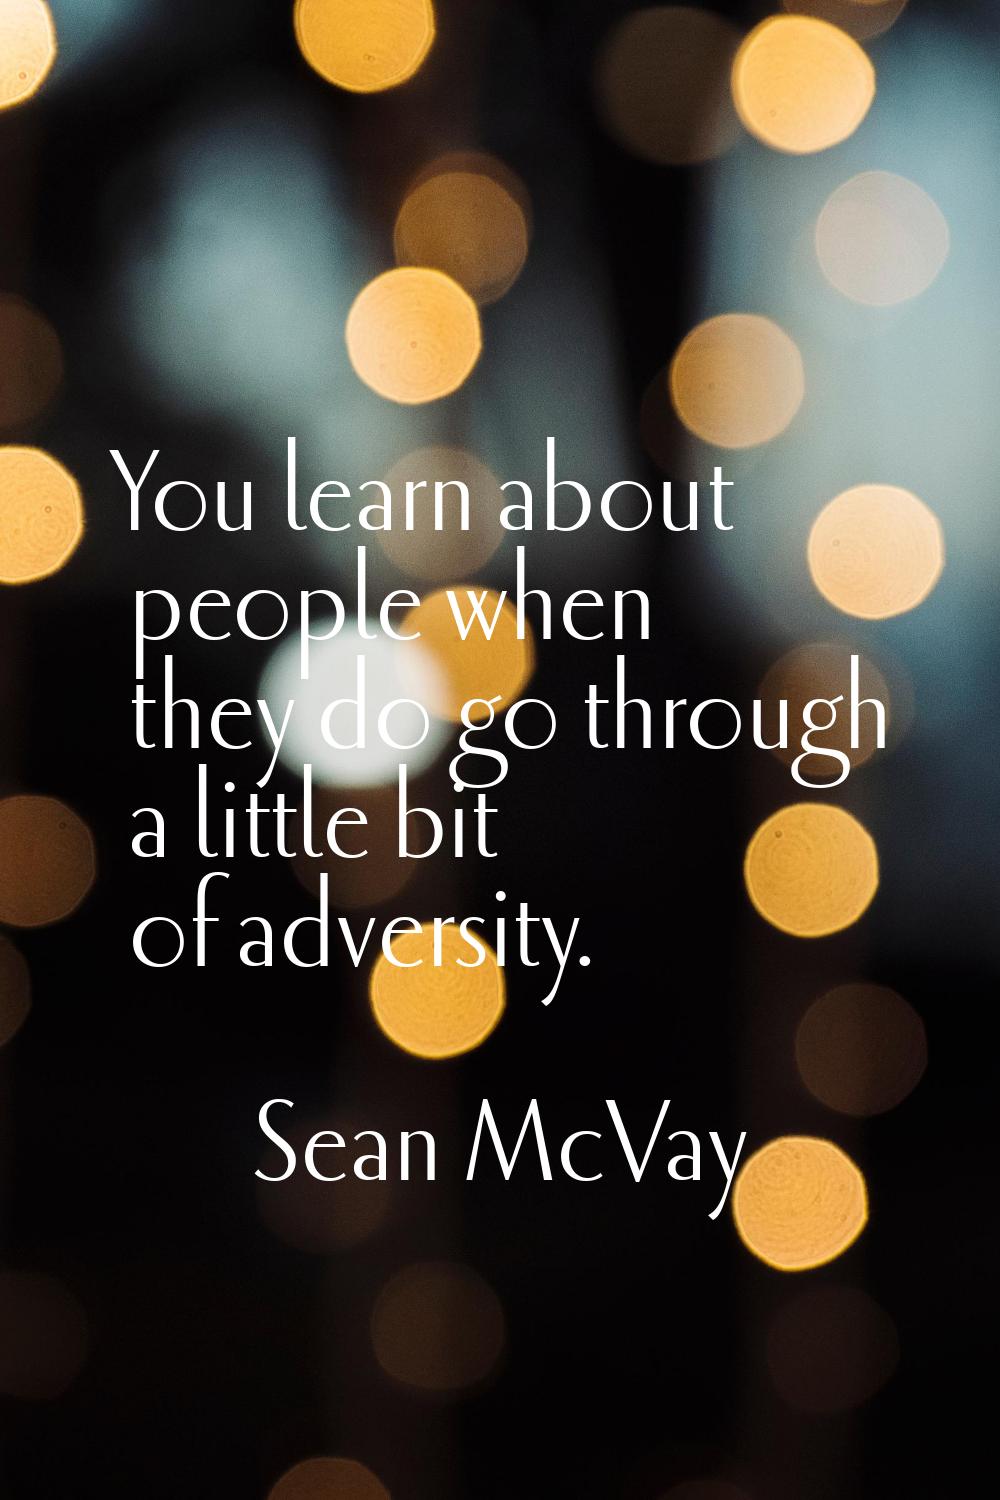 You learn about people when they do go through a little bit of adversity.